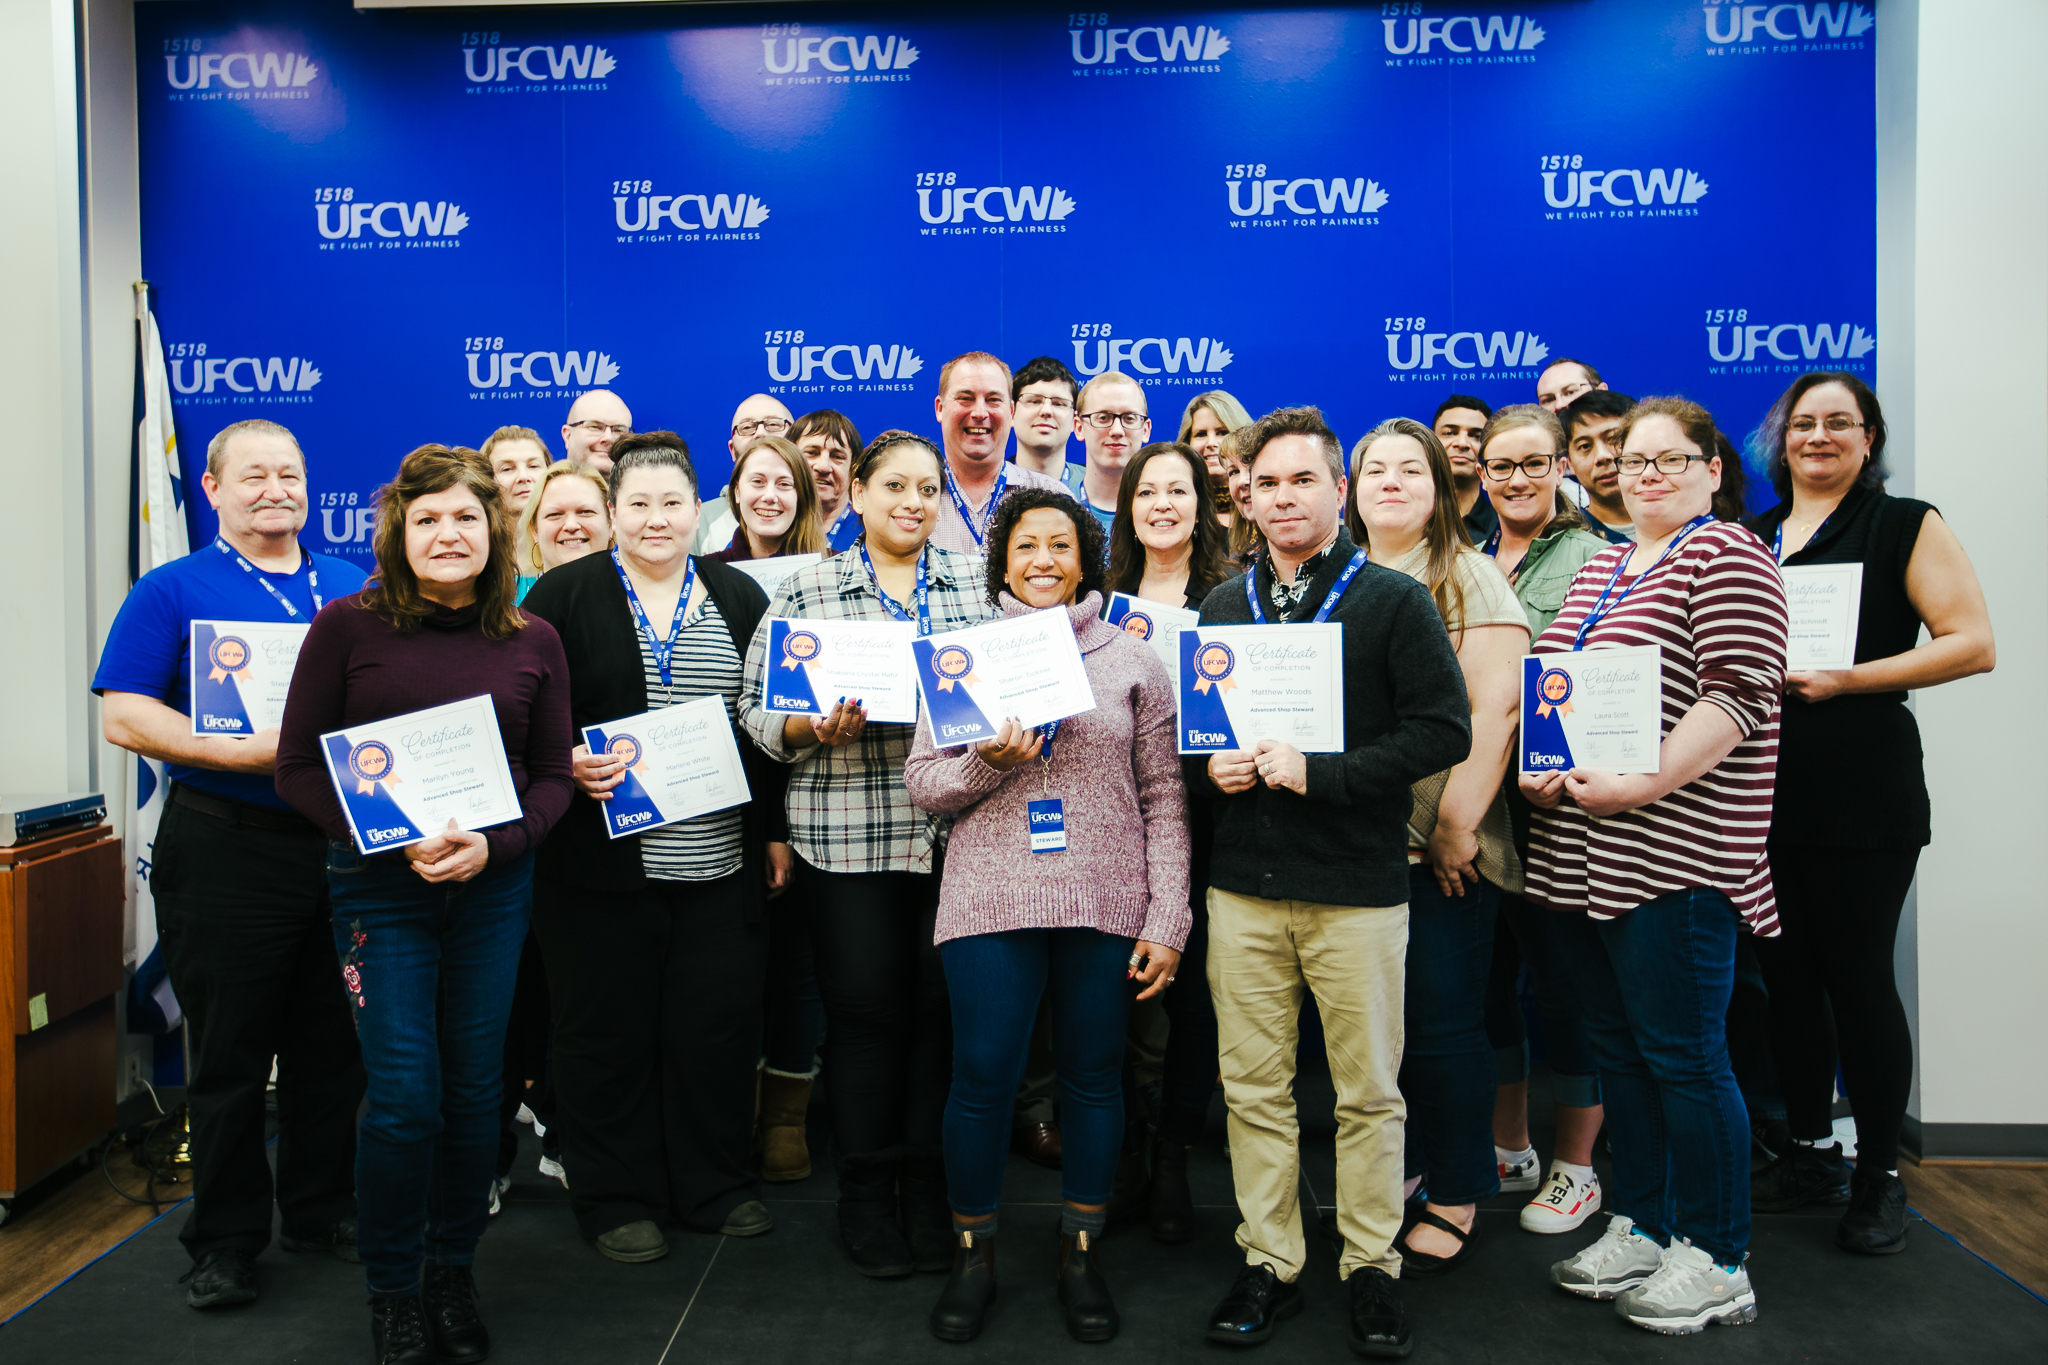 UFCW Members stand with course certificates